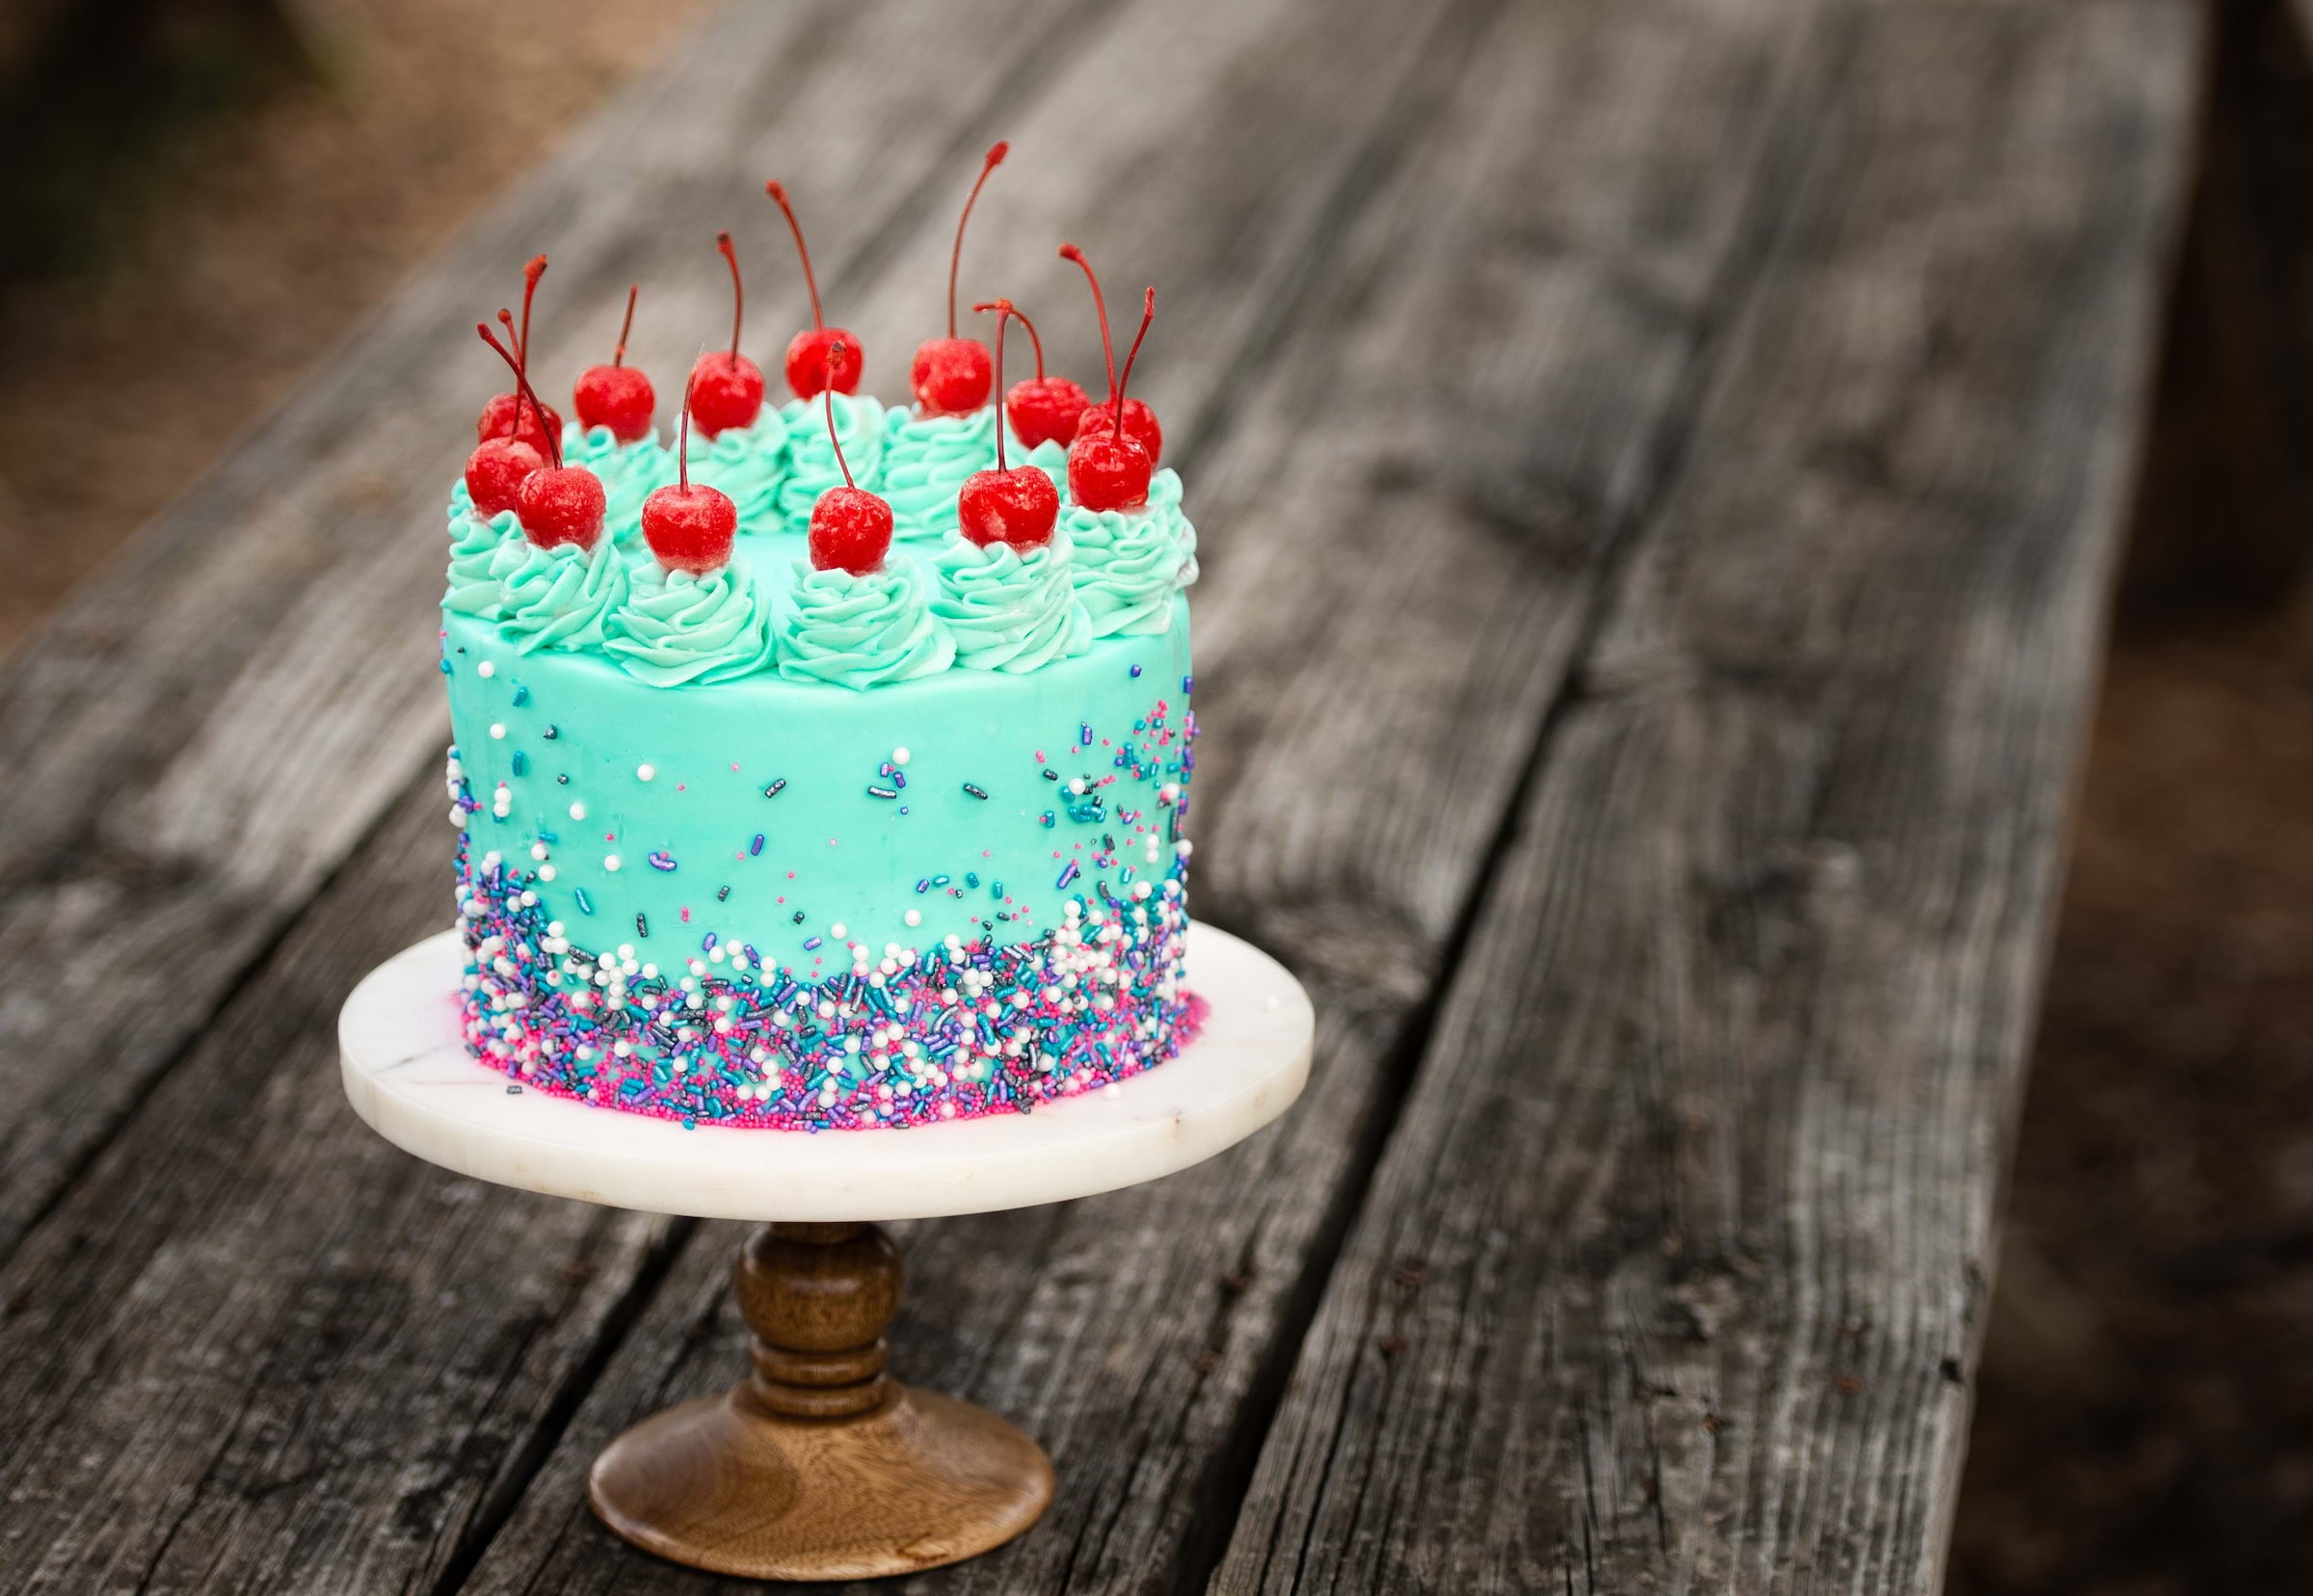 Where to order the best birthday cakes in London